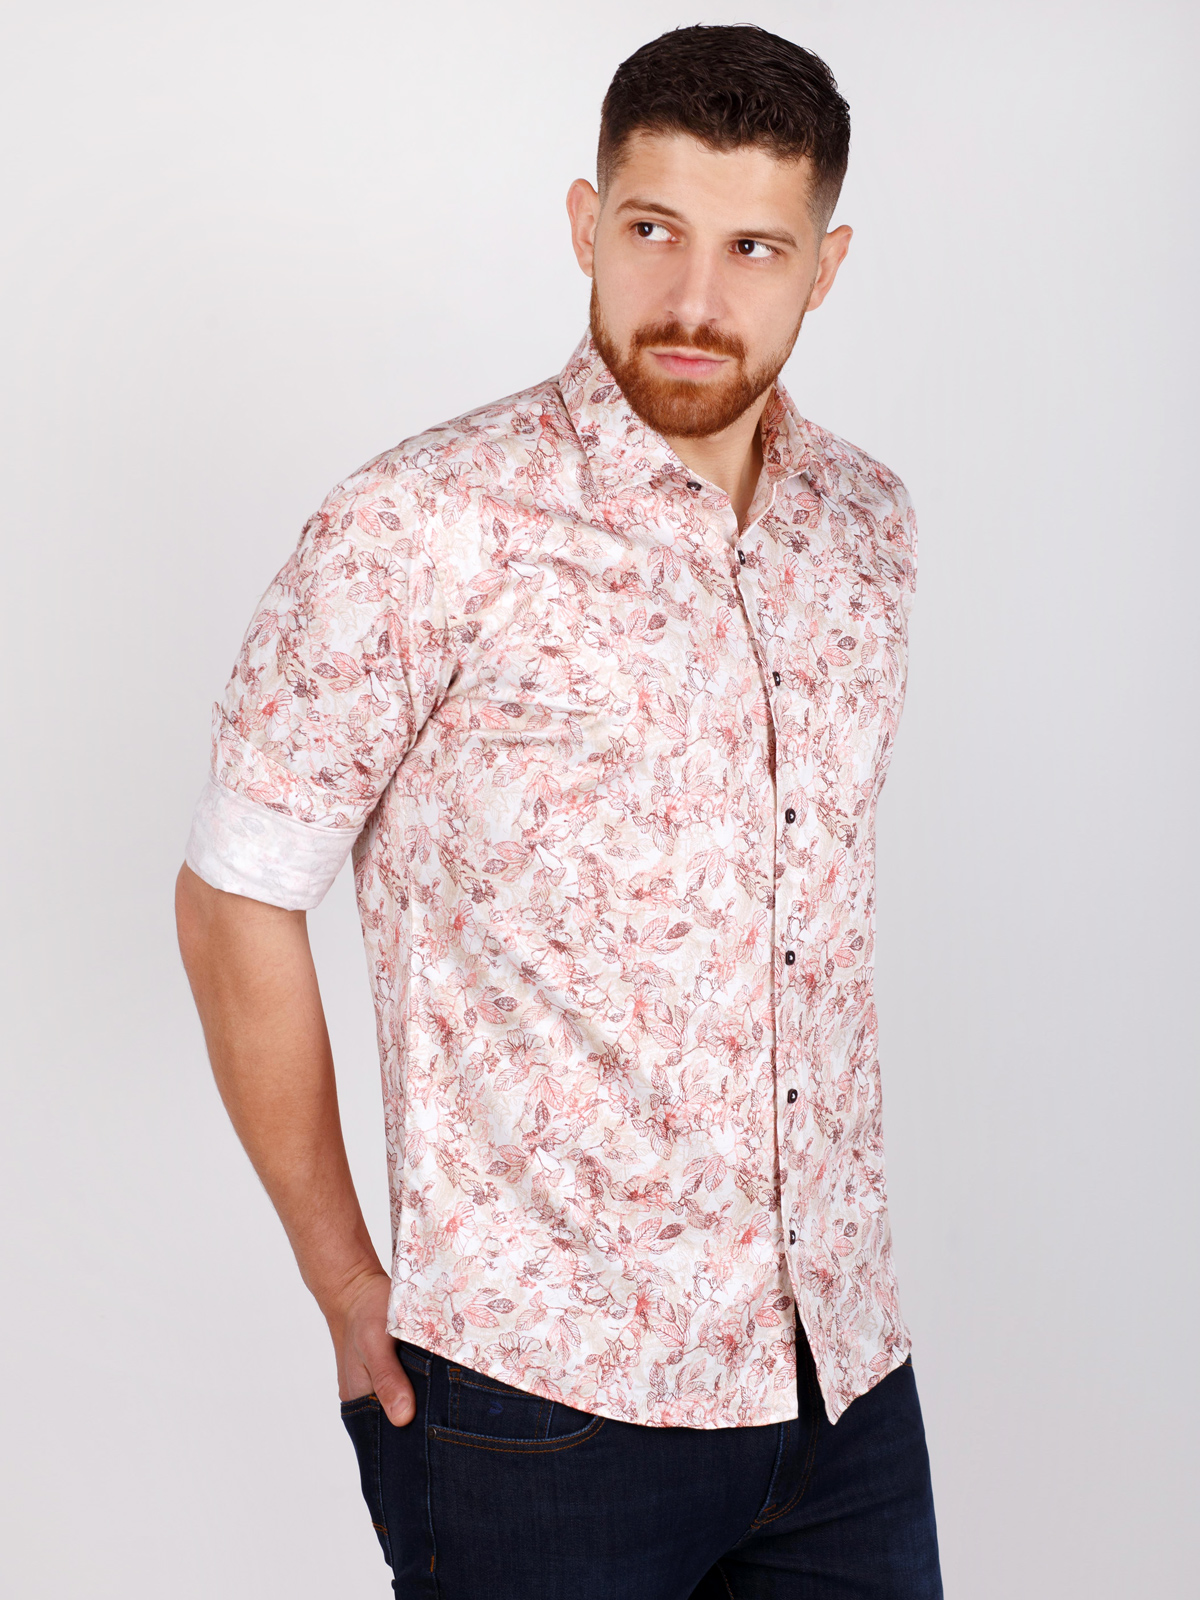 Cotton shirt with floral motif - 21501 € 38.81 img2